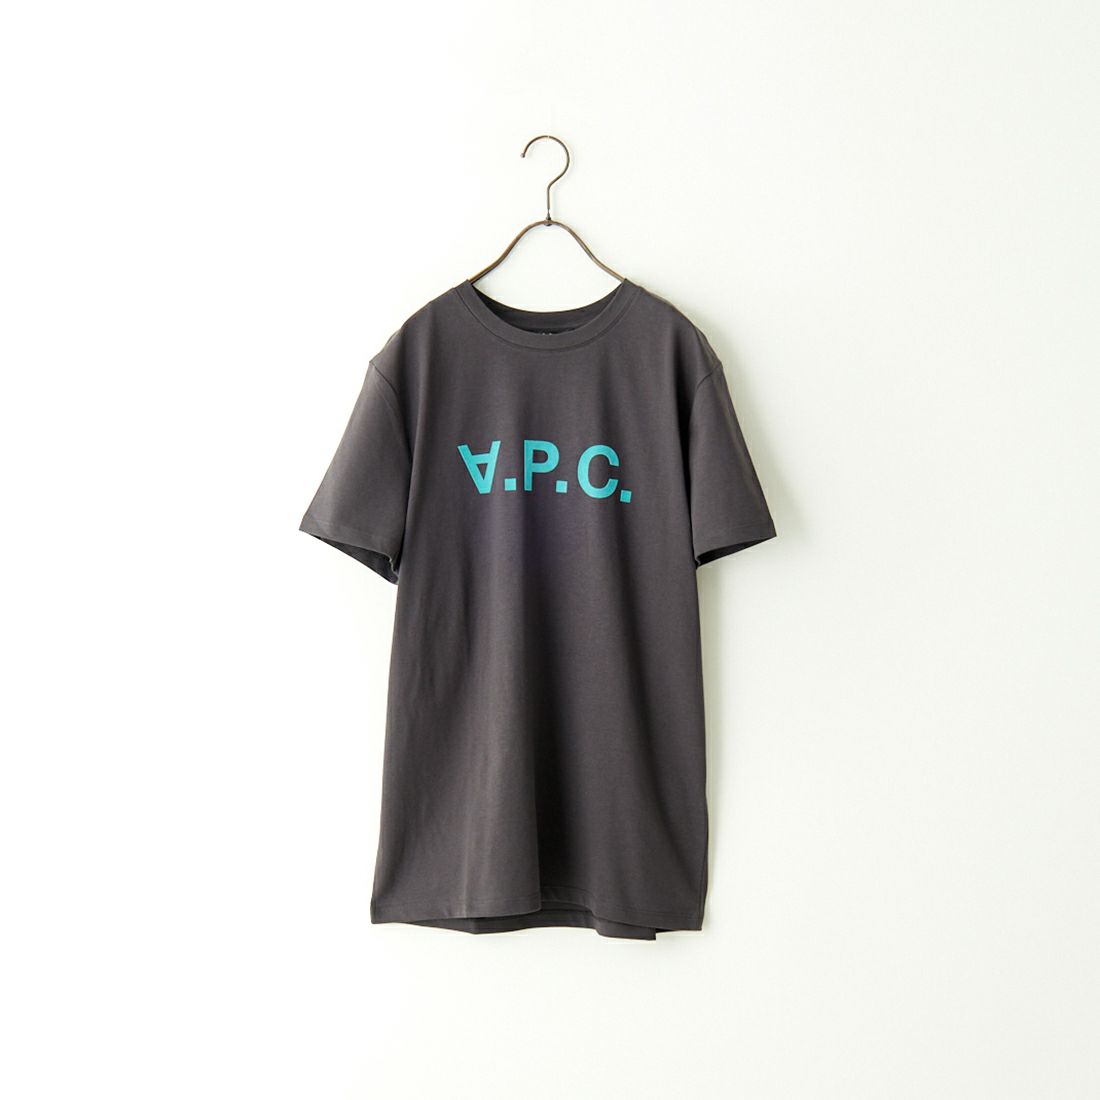 A.P.C. [アー・ペー・セー] VPCロゴTシャツ [T-SHIRT-VPC-COLOR-H] 97 ANTHRAC